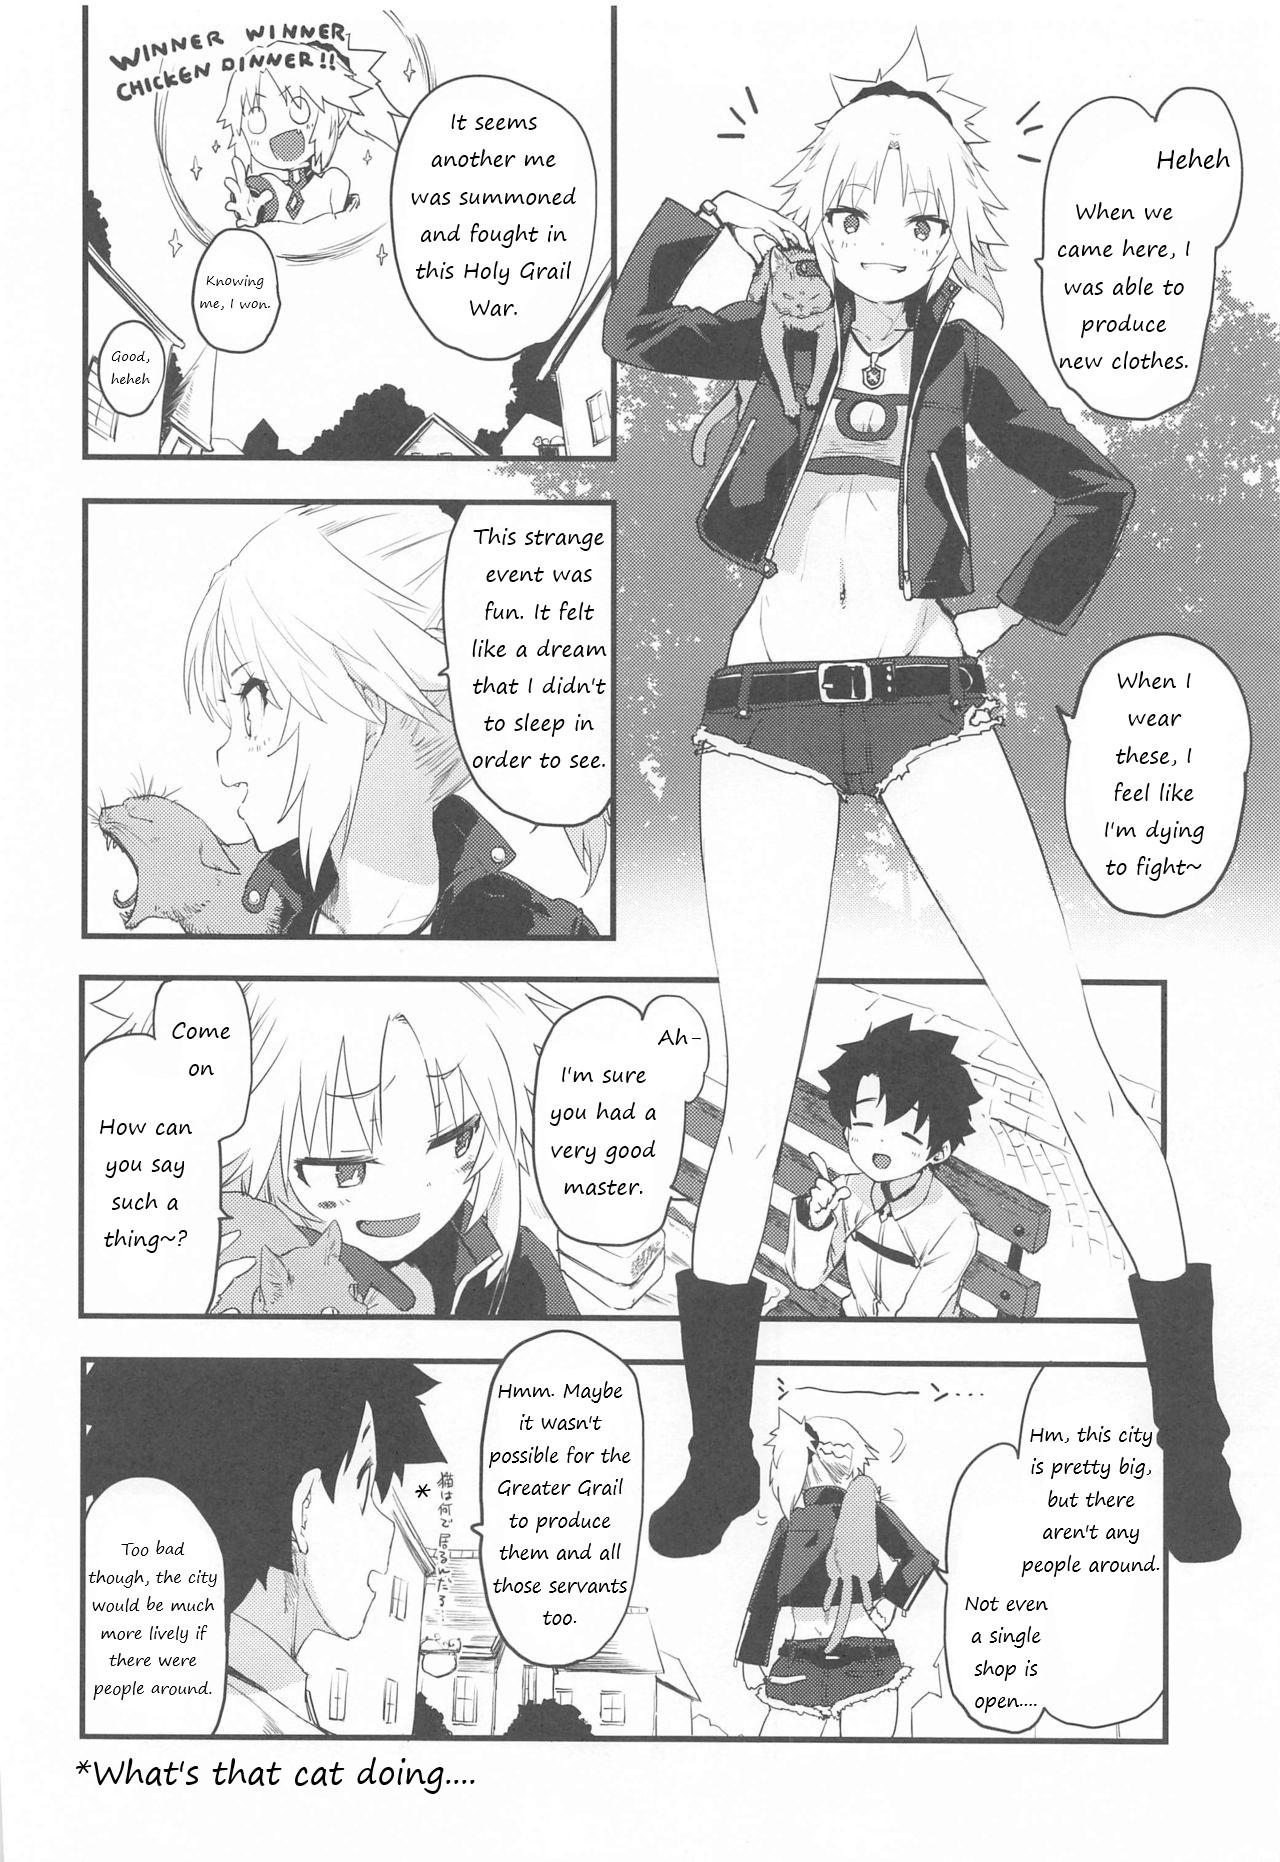 Butthole Memory of Honey Night - Fate grand order Webcams - Page 3